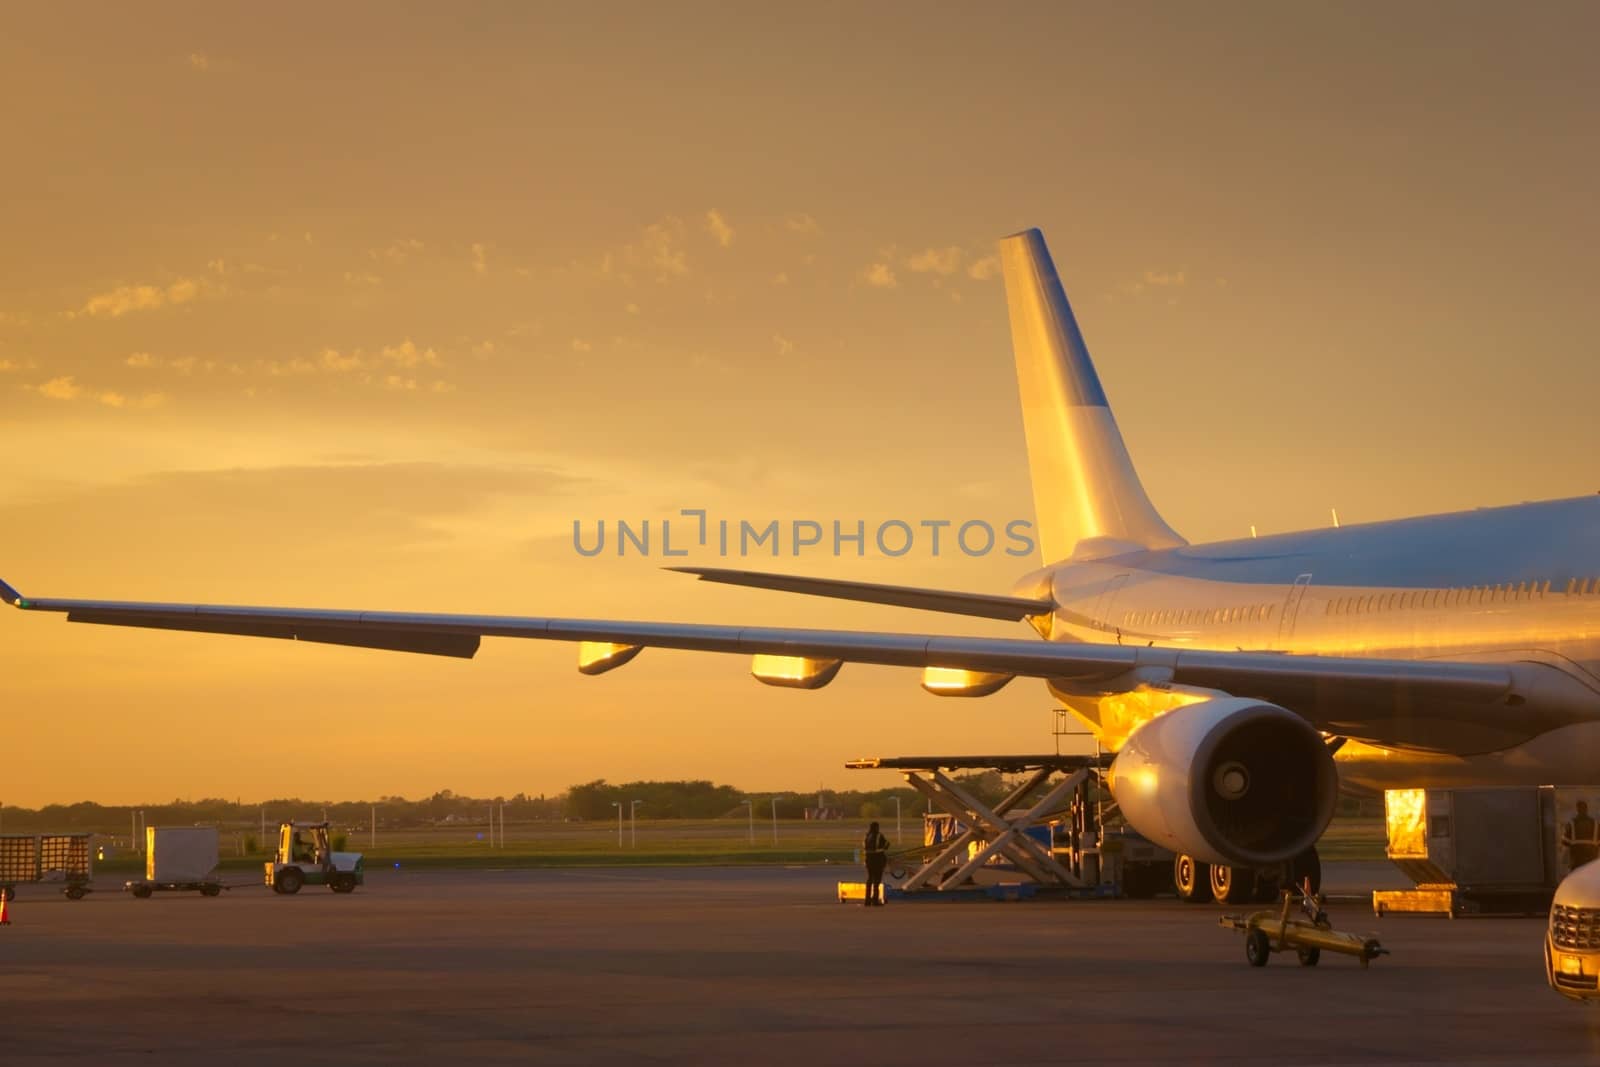 Airport ground crew loading cargo and luggage on a commercial aircraft at dawn. by hernan_hyper